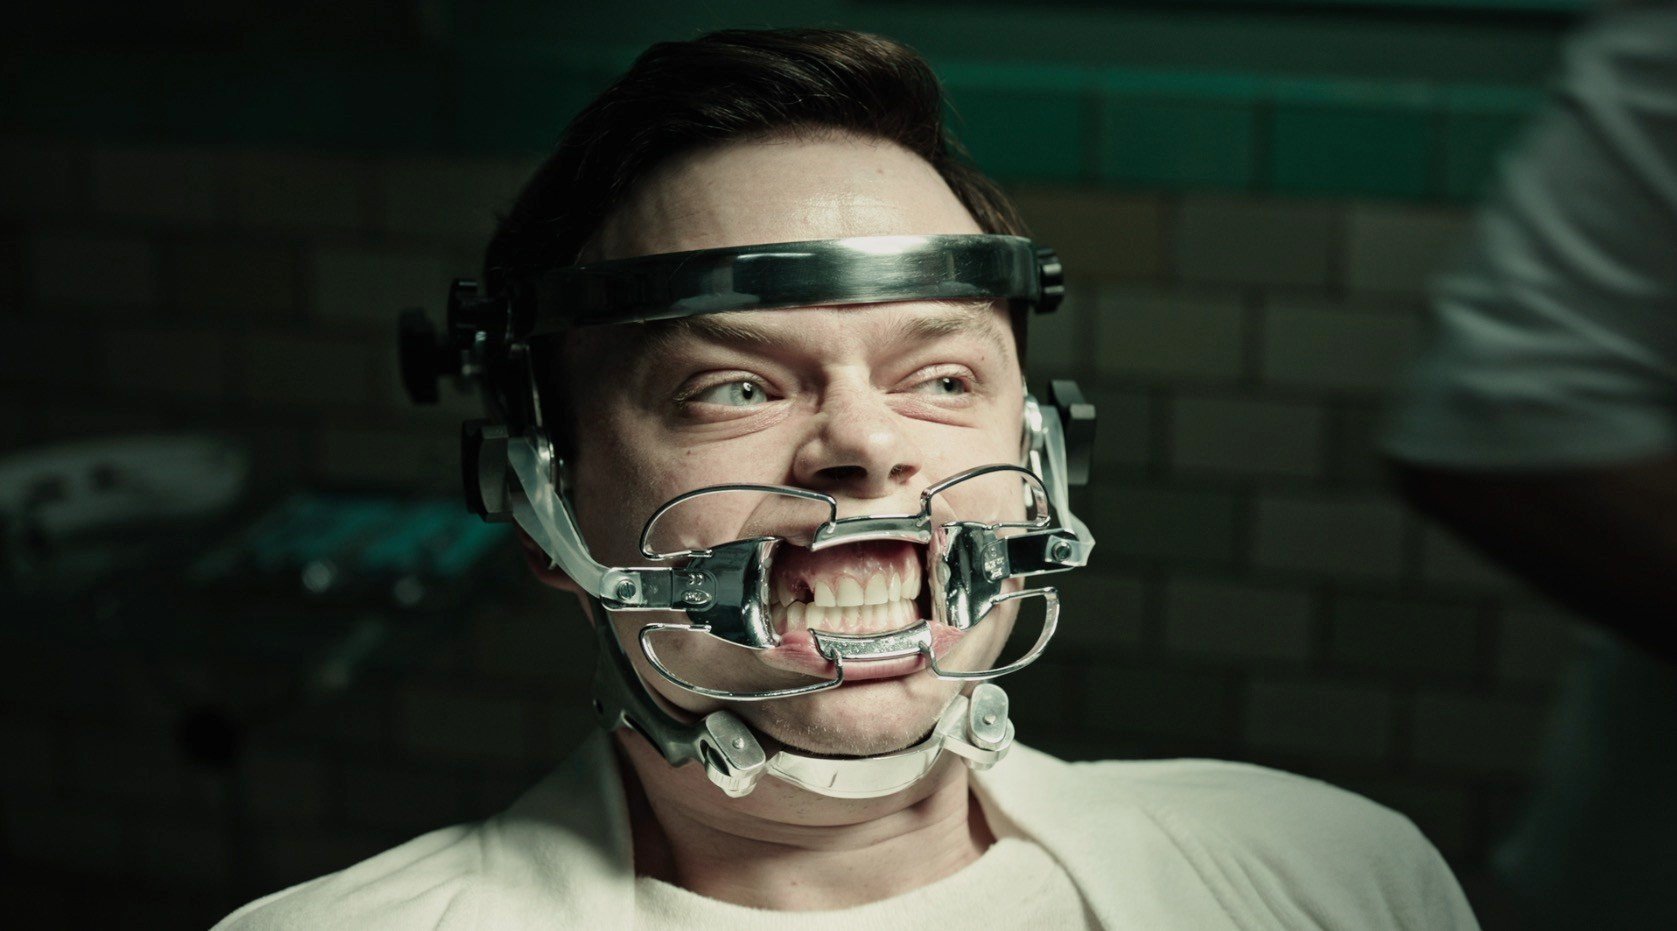 Dane DeHaan stars as Lockhart in 20th Century Fox's ACure for Wellness (2017)